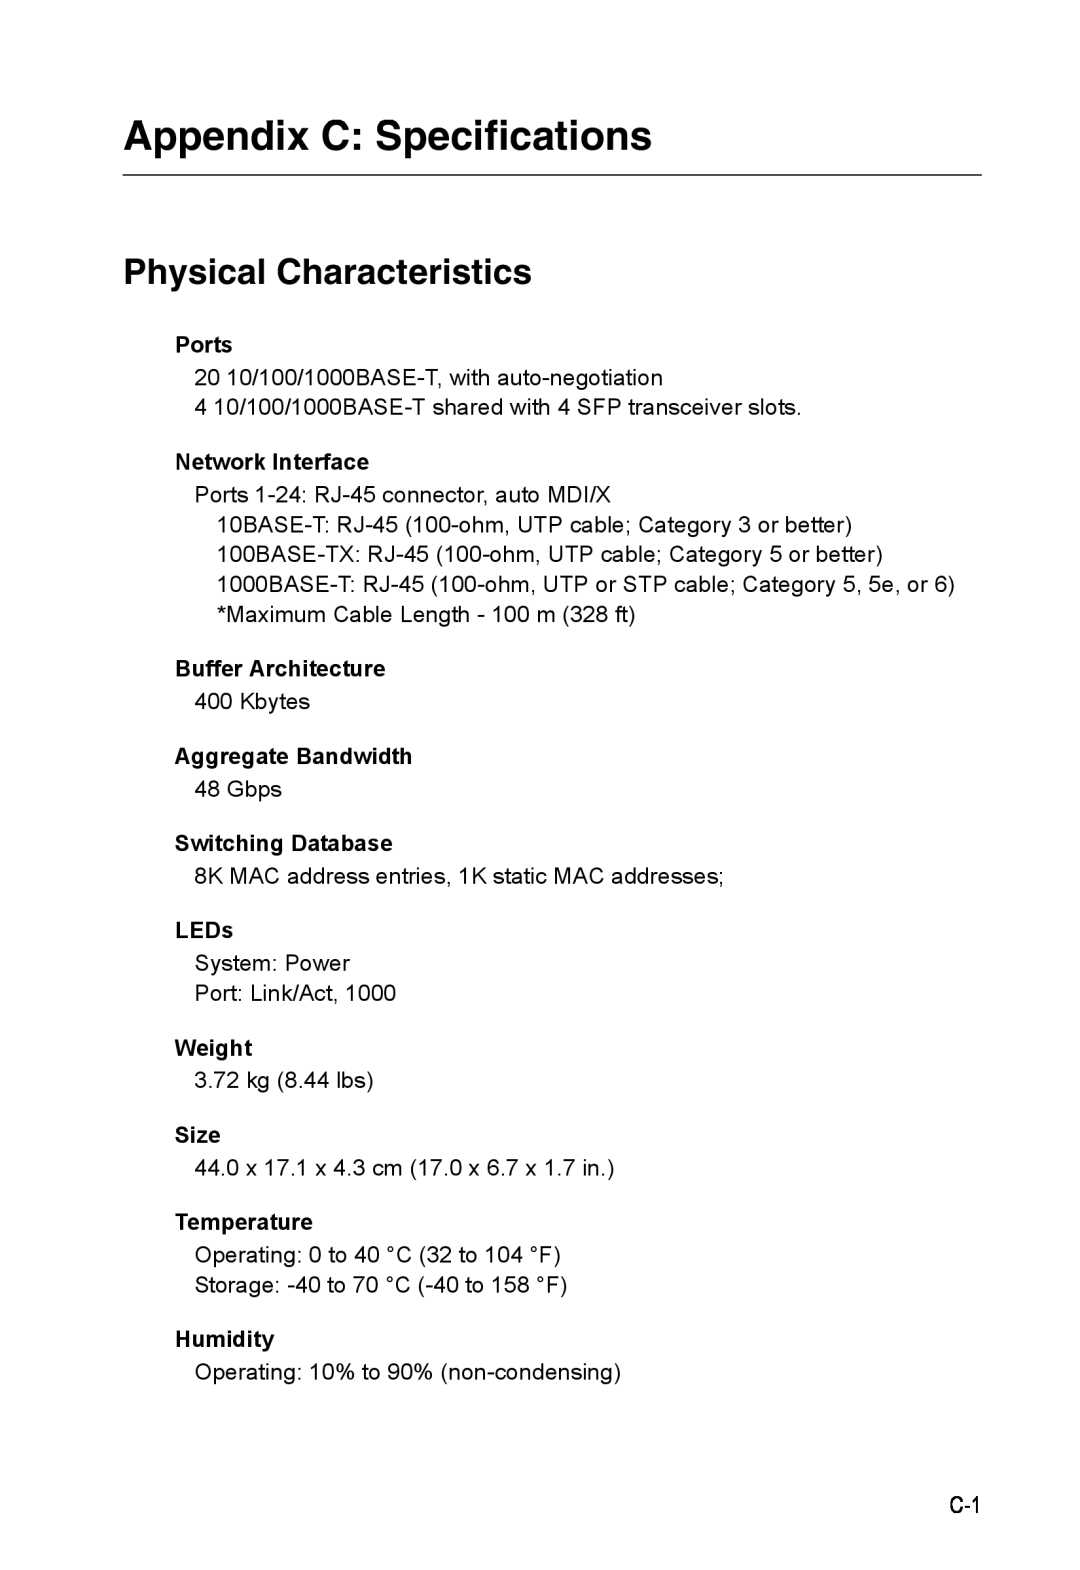 Accton Technology ES4324 manual Appendix C Specifications, Physical Characteristics 